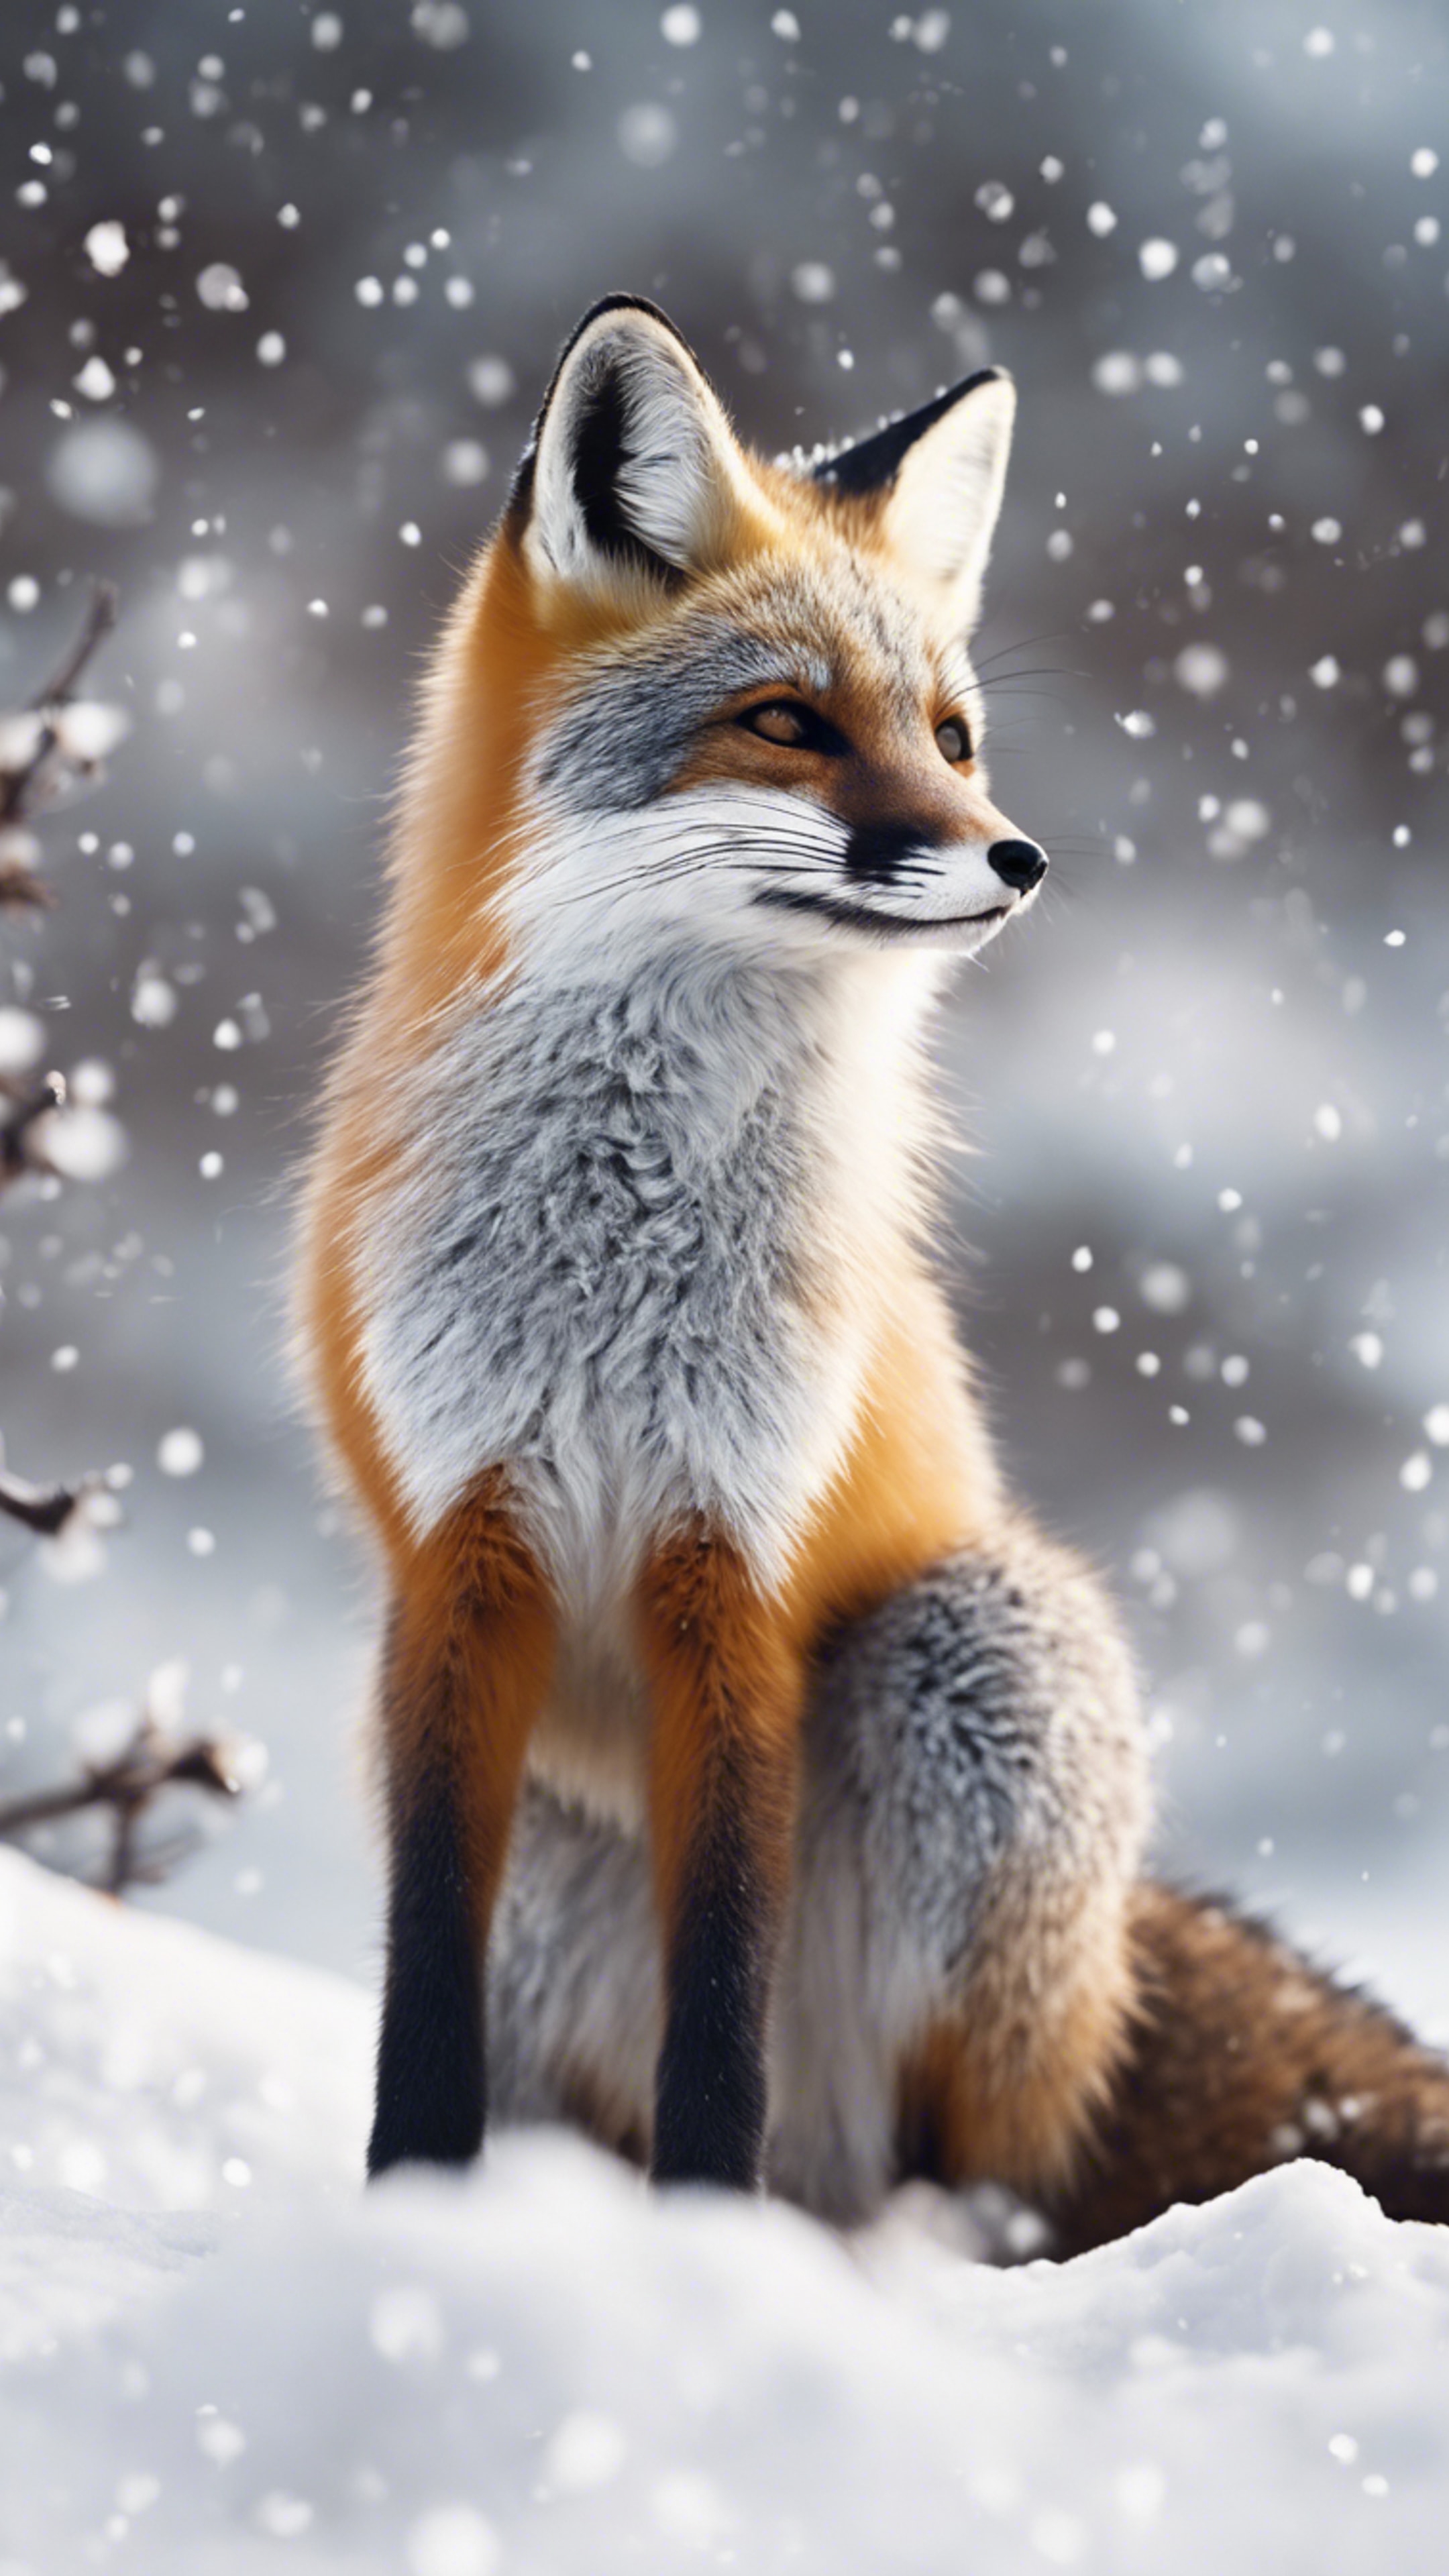 A kawaii gray fox in snow, wagging its fluffy tail. Wallpaper[1556a6a351d3452e9ea4]